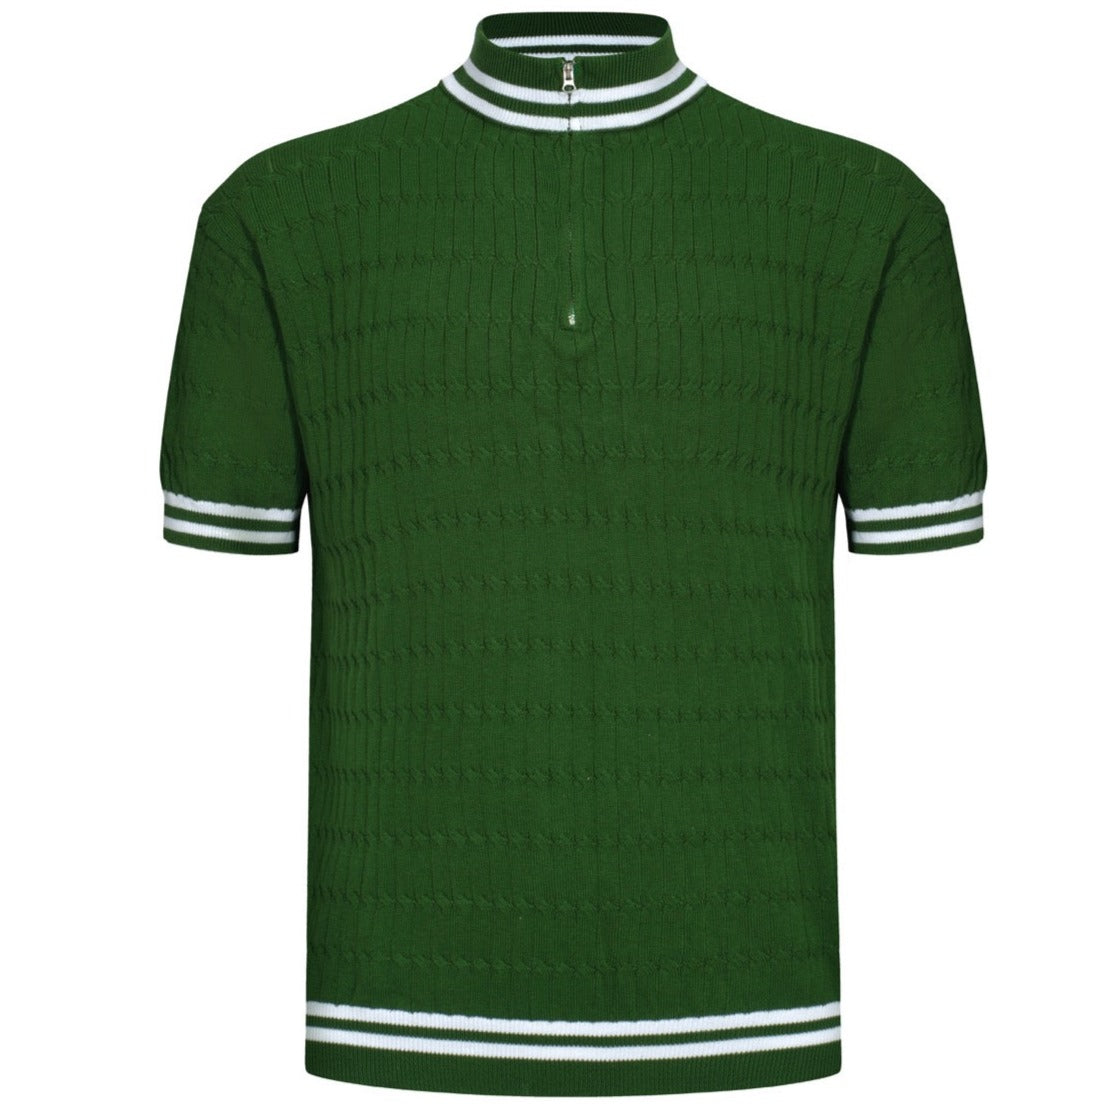 OXKNIT Men Vintage Clothing 1960s Mod Style Casual Dark Green Knitted Wear Retro TShirt